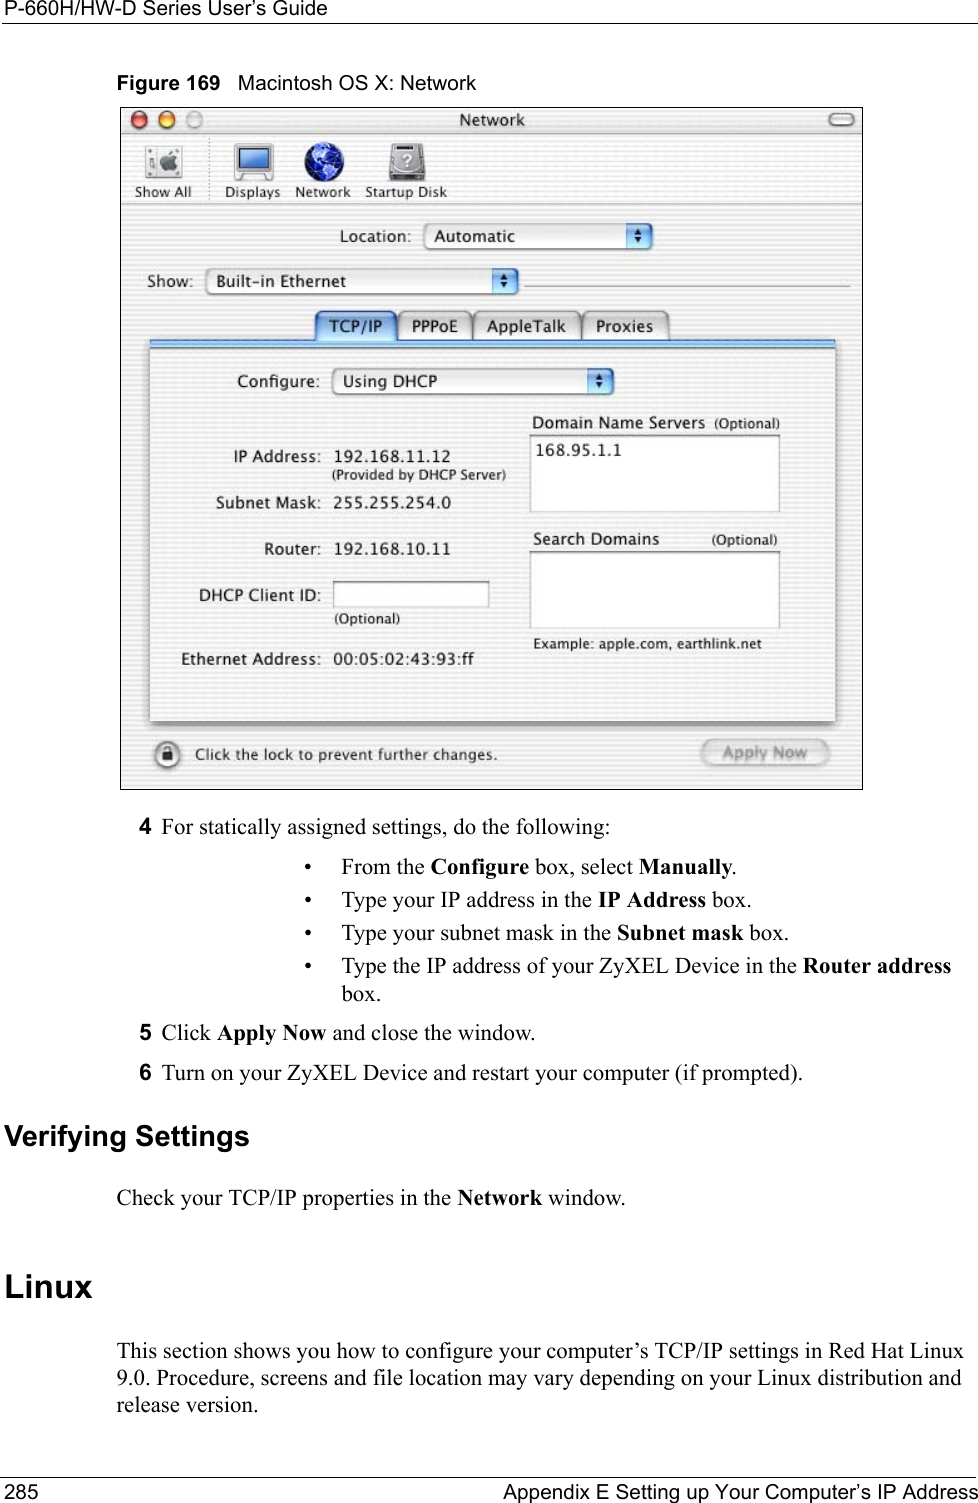 P-660H/HW-D Series User’s Guide285 Appendix E Setting up Your Computer’s IP AddressFigure 169   Macintosh OS X: Network4For statically assigned settings, do the following:•From the Configure box, select Manually.• Type your IP address in the IP Address box.• Type your subnet mask in the Subnet mask box.• Type the IP address of your ZyXEL Device in the Router address box.5Click Apply Now and close the window.6Turn on your ZyXEL Device and restart your computer (if prompted).Verifying SettingsCheck your TCP/IP properties in the Network window.Linux This section shows you how to configure your computer’s TCP/IP settings in Red Hat Linux 9.0. Procedure, screens and file location may vary depending on your Linux distribution and release version. 